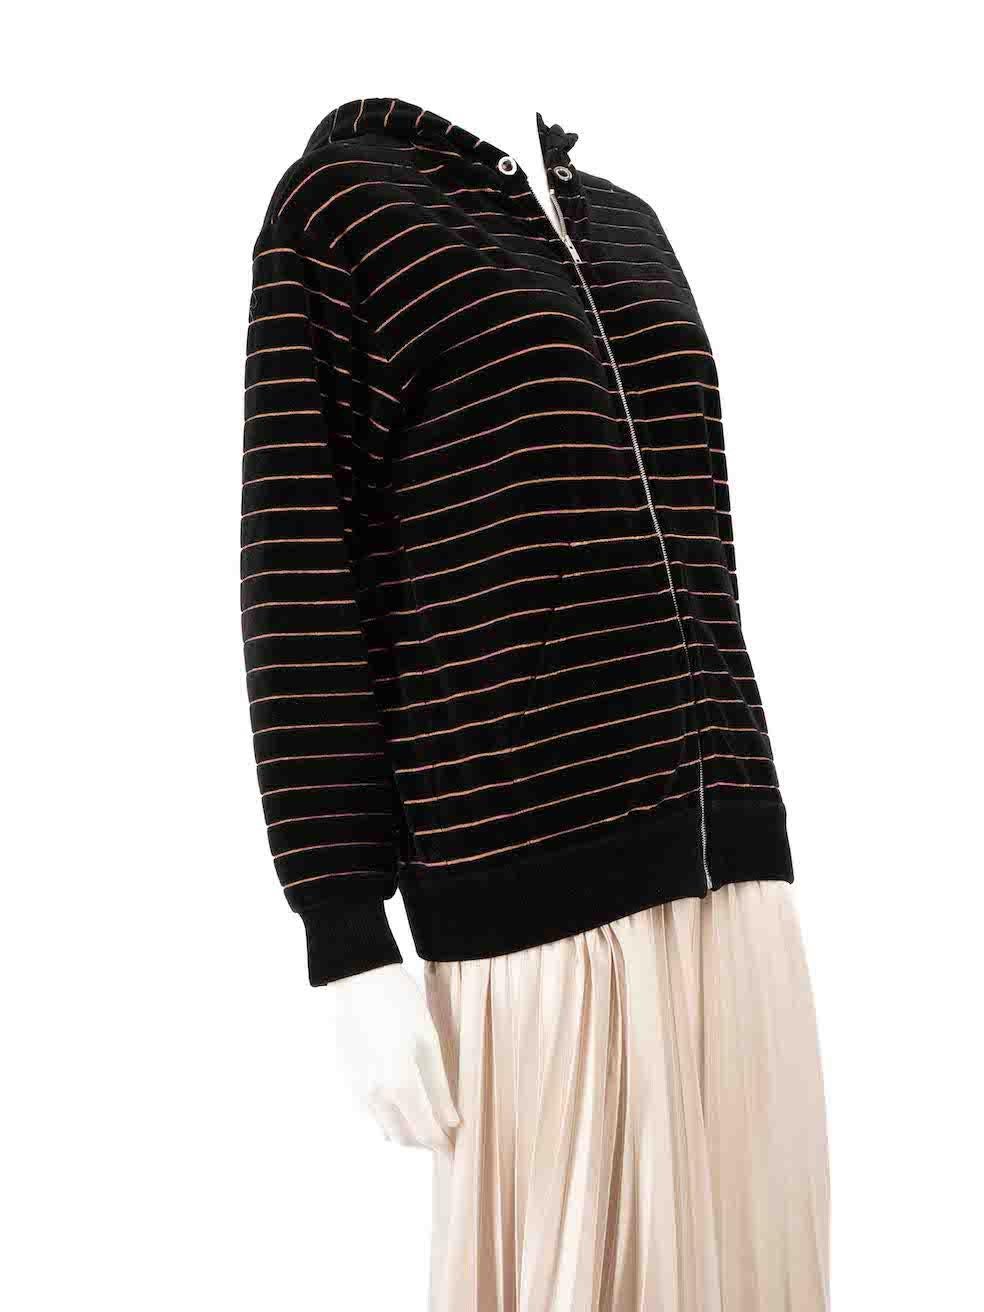 CONDITION is Very good. Minimal wear to hoodie is evident. Minimal wear with the drawstrings missing on this used Sonia Rykiel designer resale item.
 
 
 
 Details
 
 
 Black
 
 Velvet
 
 Track jacket
 
 Metallic
 
 Metallic copper striped
 
